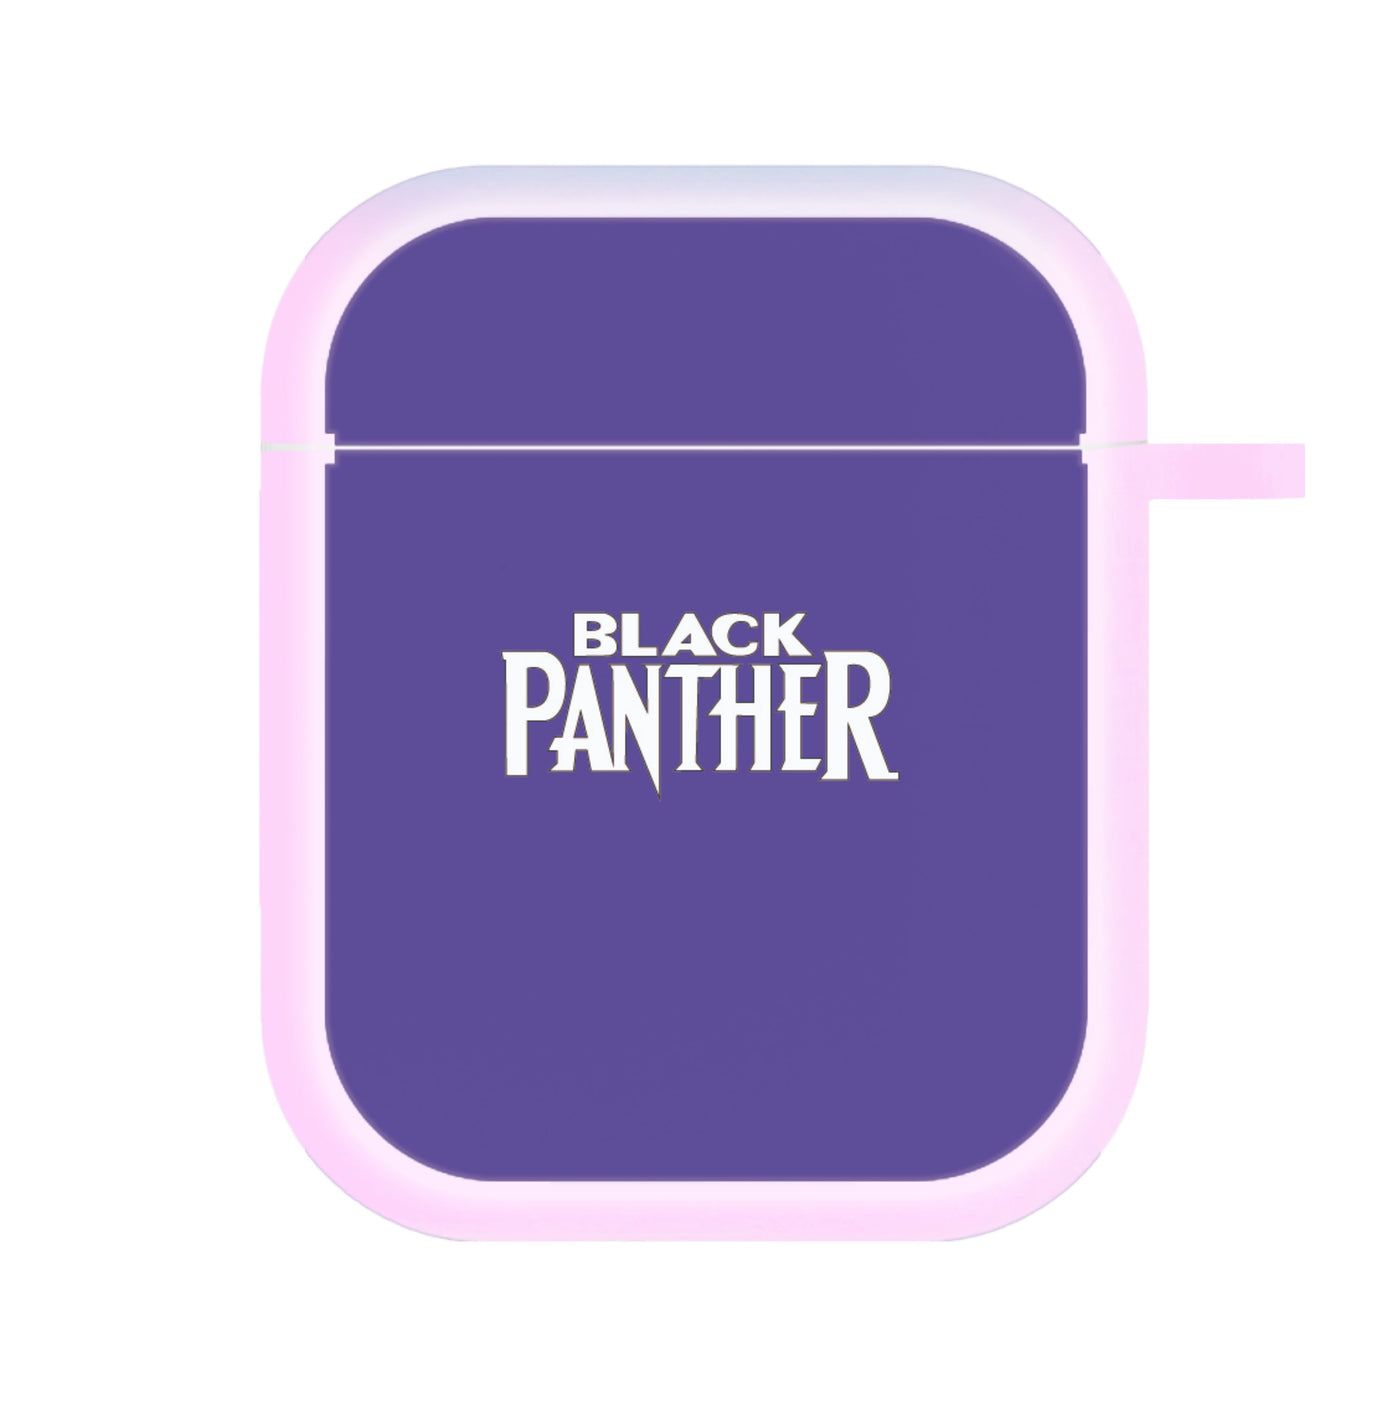 Black Panther Text - Black Panther AirPods Case